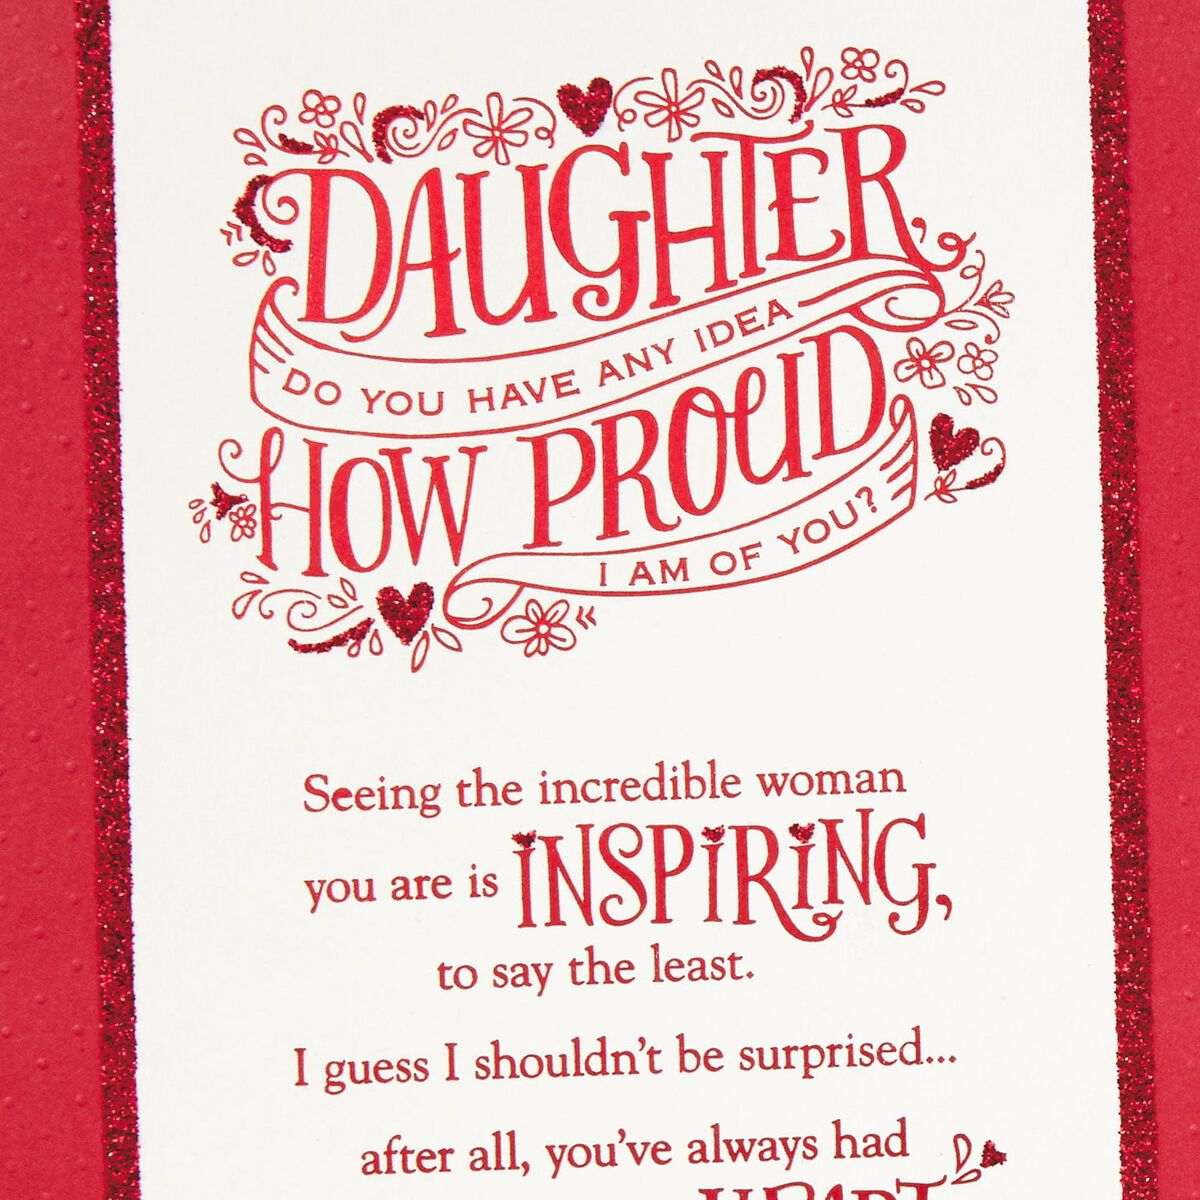 a-full-heart-valentine-s-day-card-for-daughter-greeting-cards-hallmark